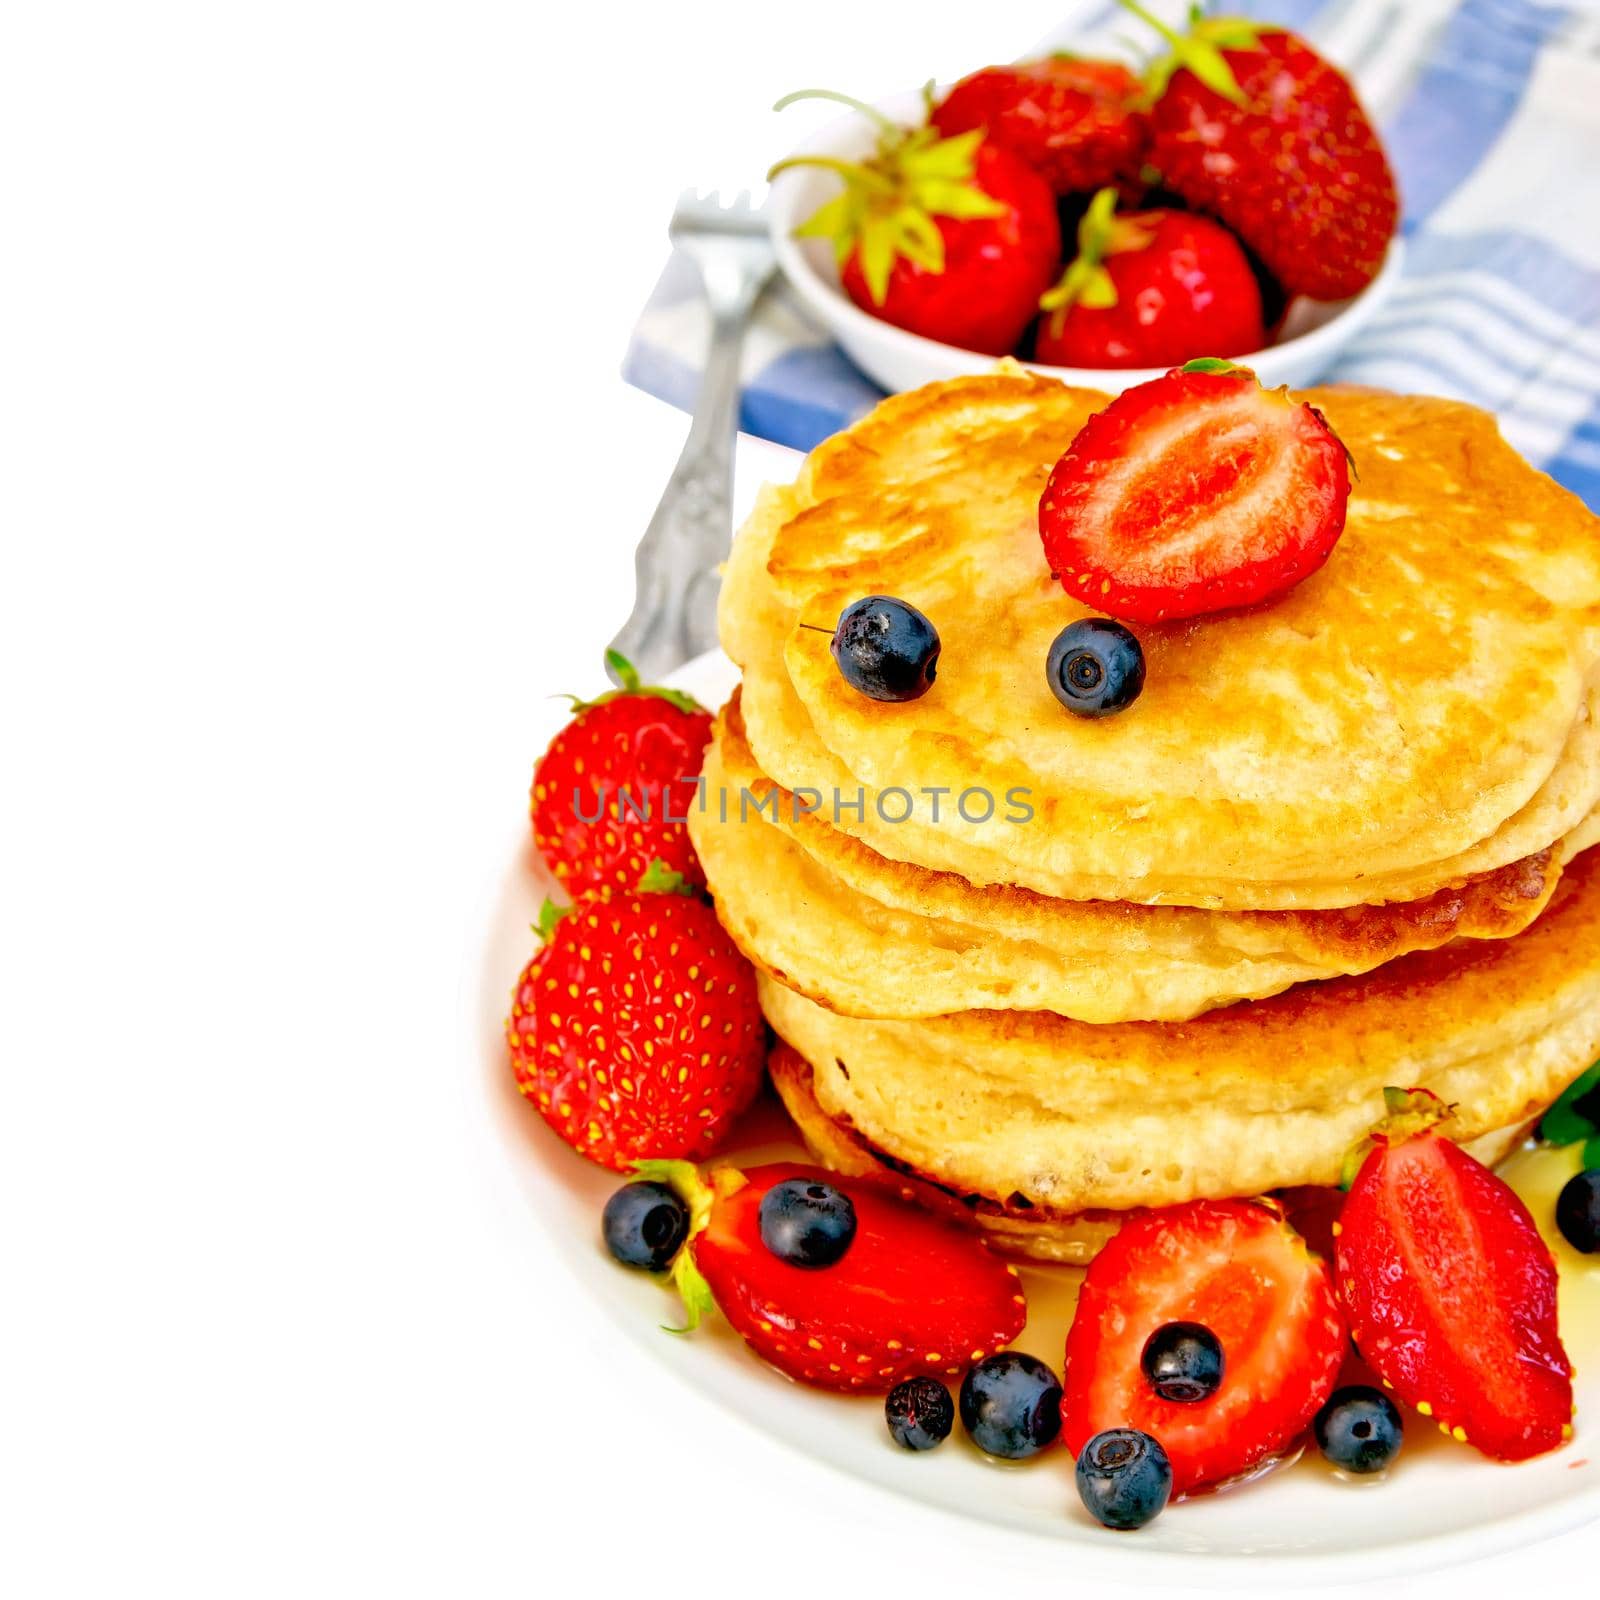 A stack of pancakes with strawberries, blueberries, honey on a white plate, fork, napkin isolated on white background